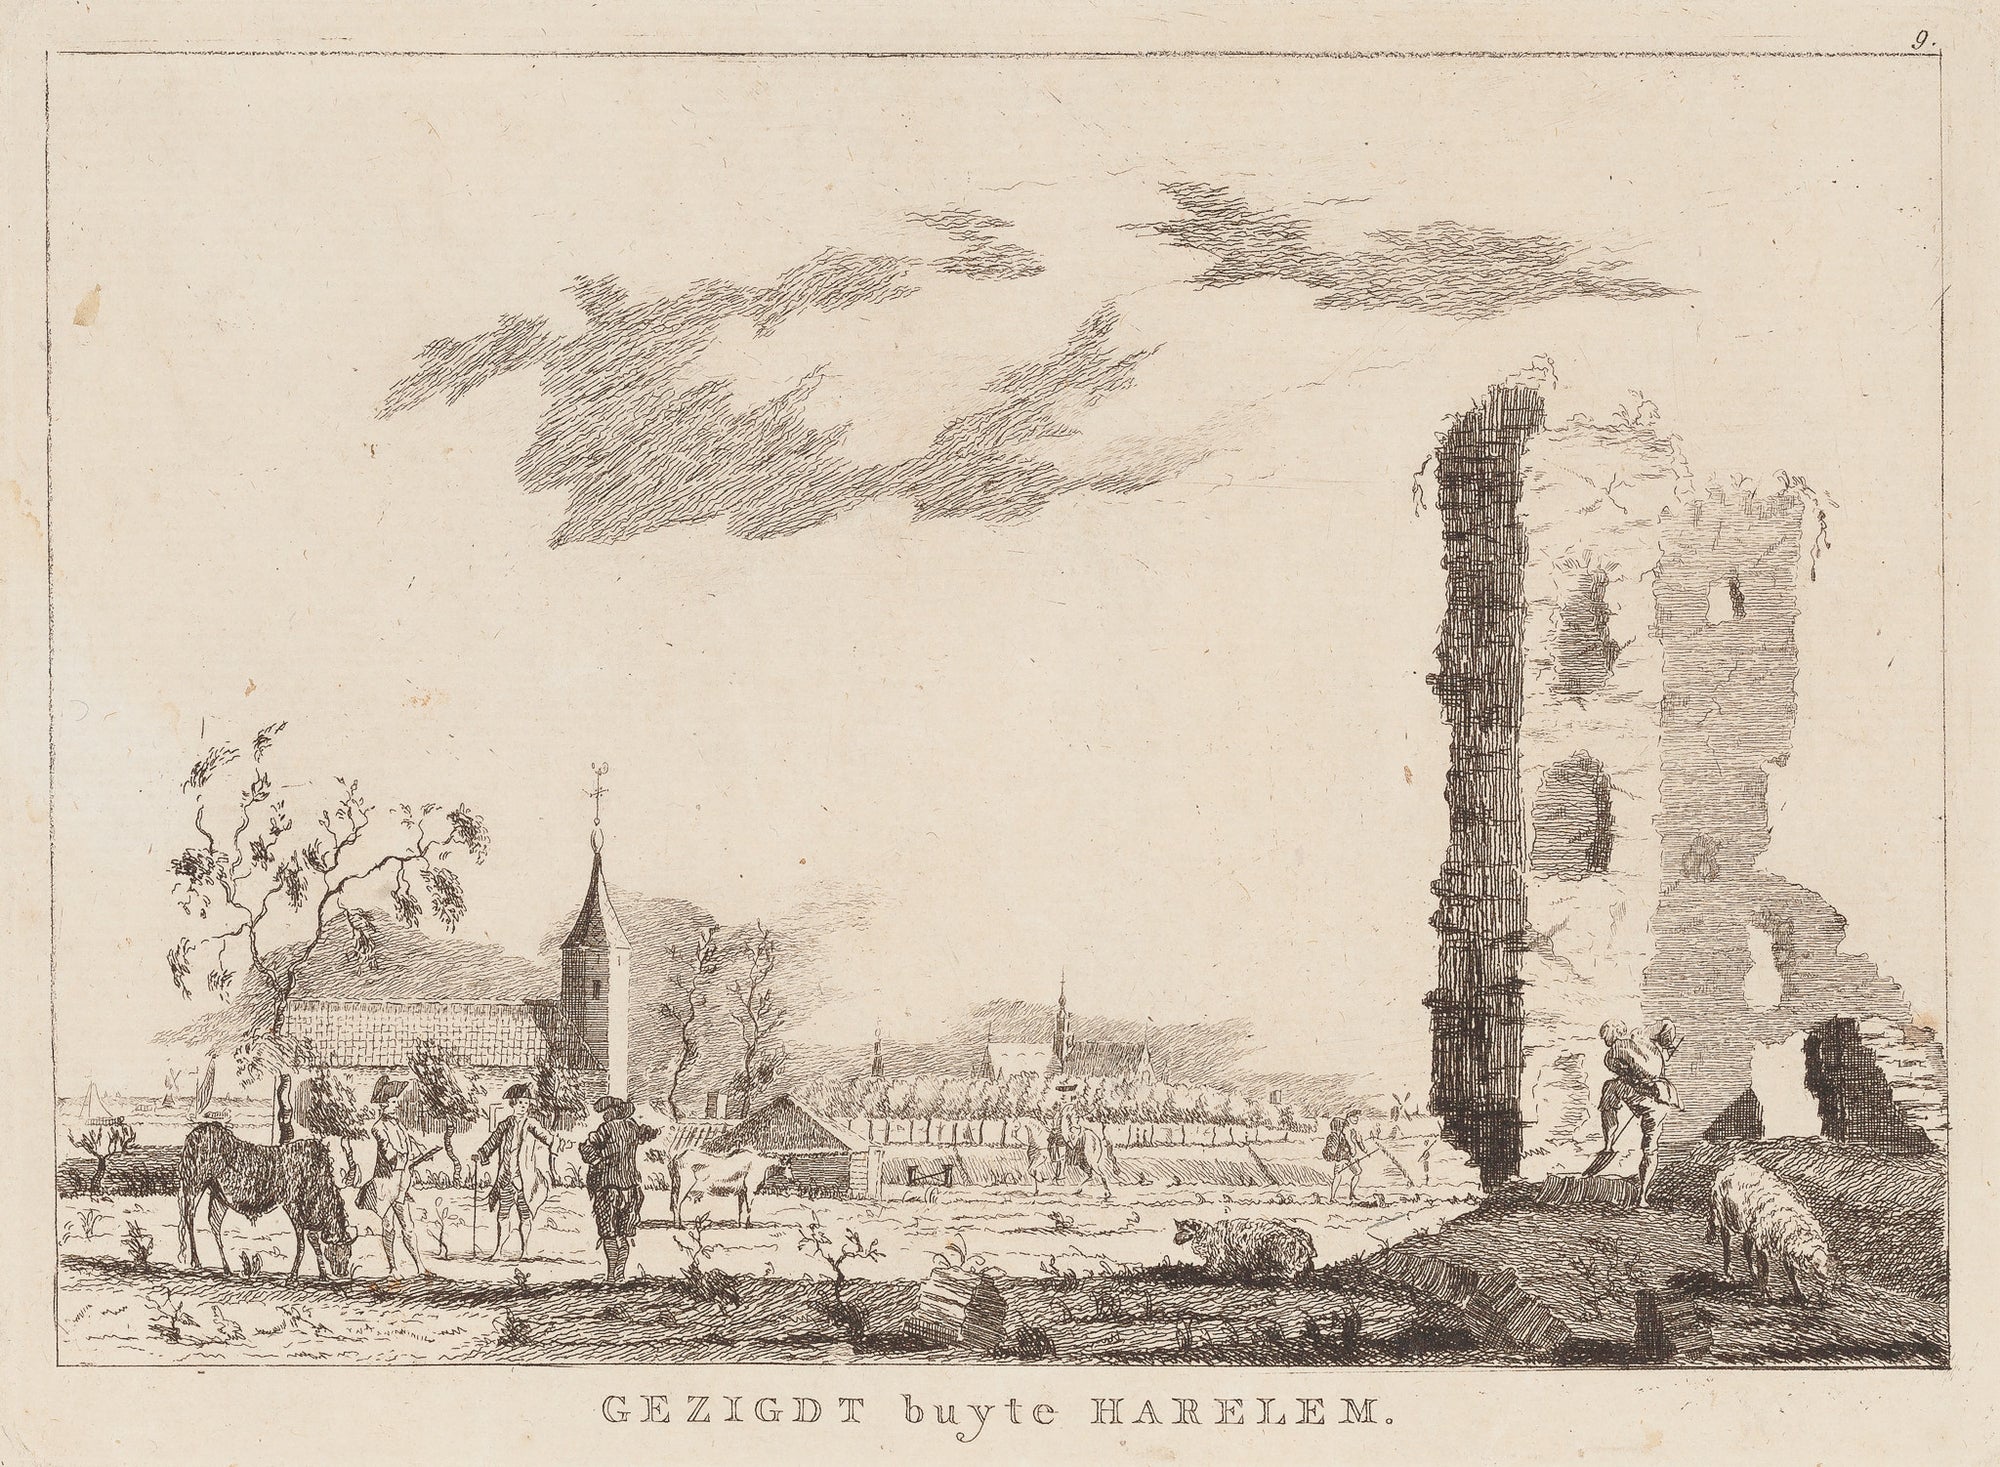 Antique print "Gezigdt buyte Harelem". View on Haarlem, seen from the North (Schoten) with the ruins of the former Huis ter Kleef.